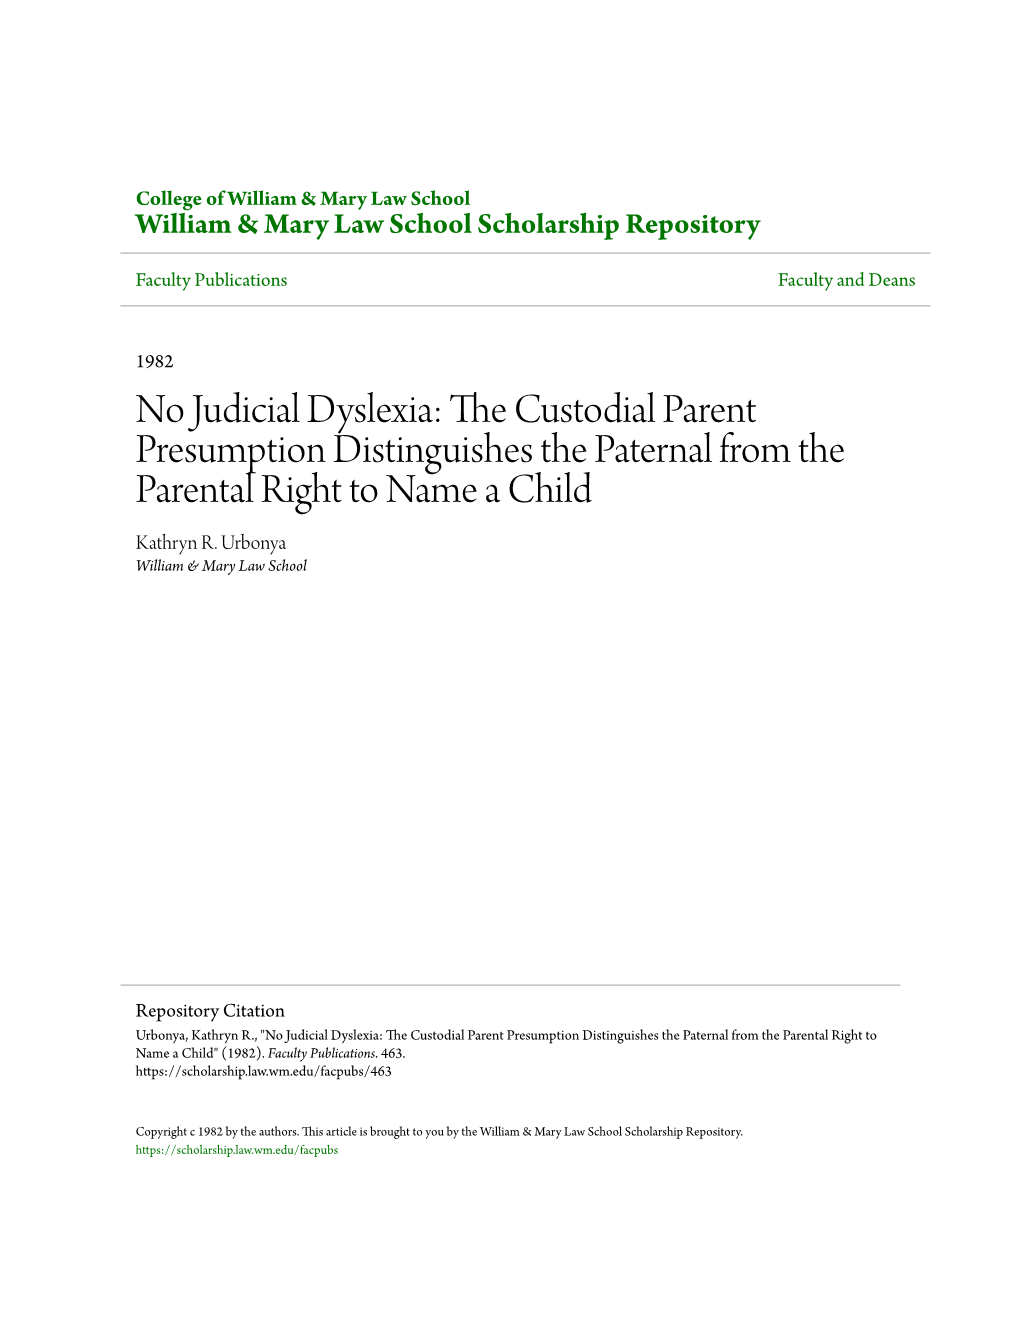 No Judicial Dyslexia: the Custodial Parent Presumption Distinguishes the Paternal from the Parental Right to Name a Child